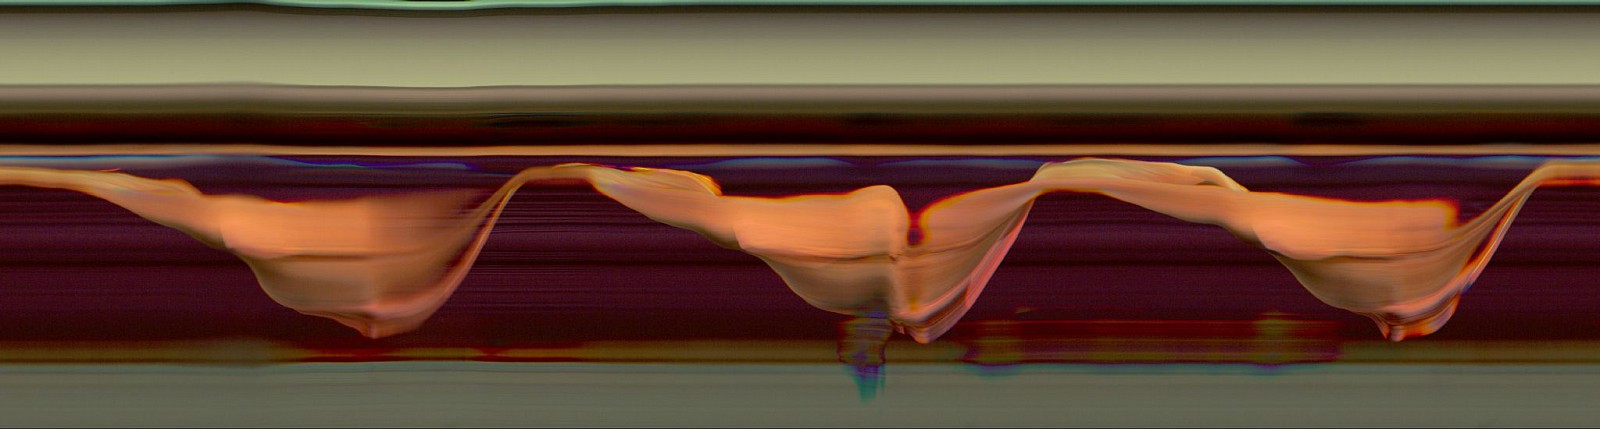 Jay Mark Johnson, TAICHI MOTION STUDY 67, 2005 Los Angeles CA
archival pigment on paper, mounted on aluminum, 40 x 149 in. (101.6 x 378.5 cm)